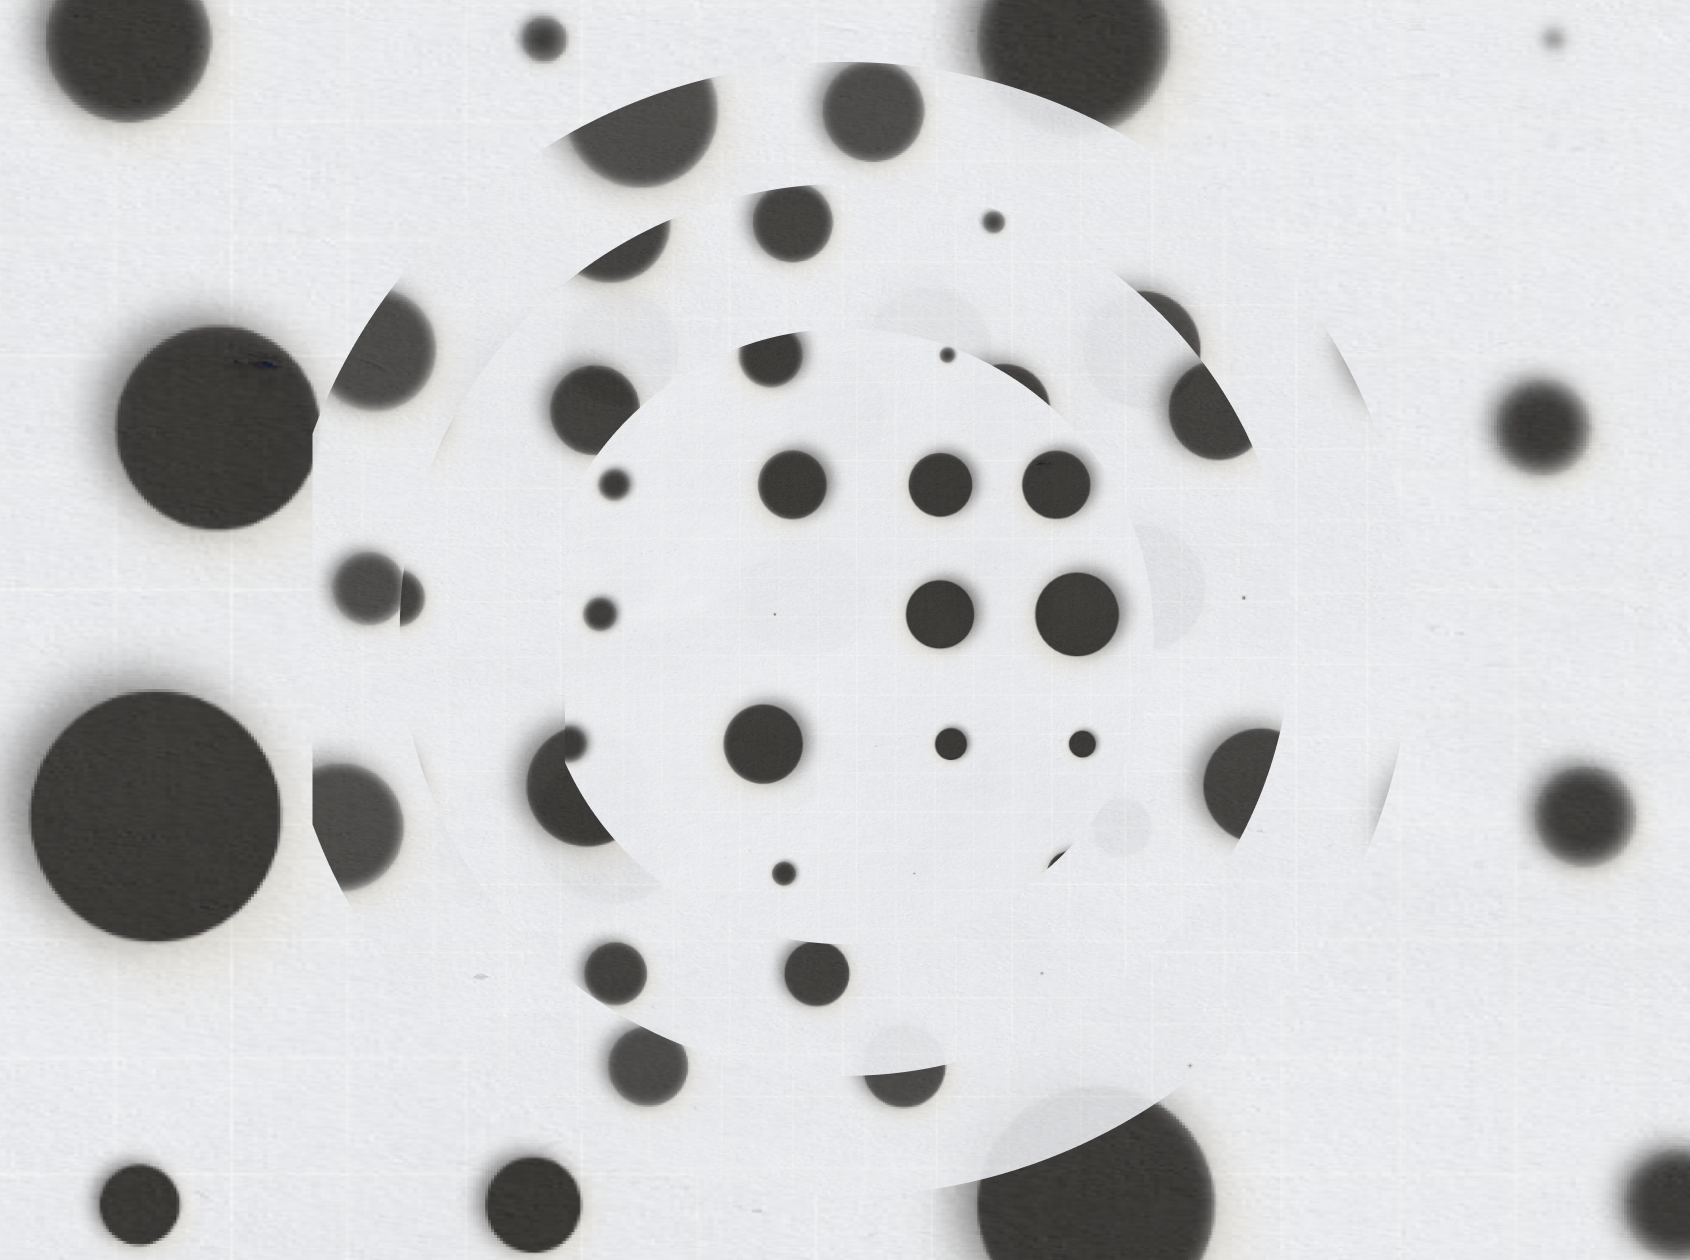 Abstract monochrome dot pattern with radial blur effect.